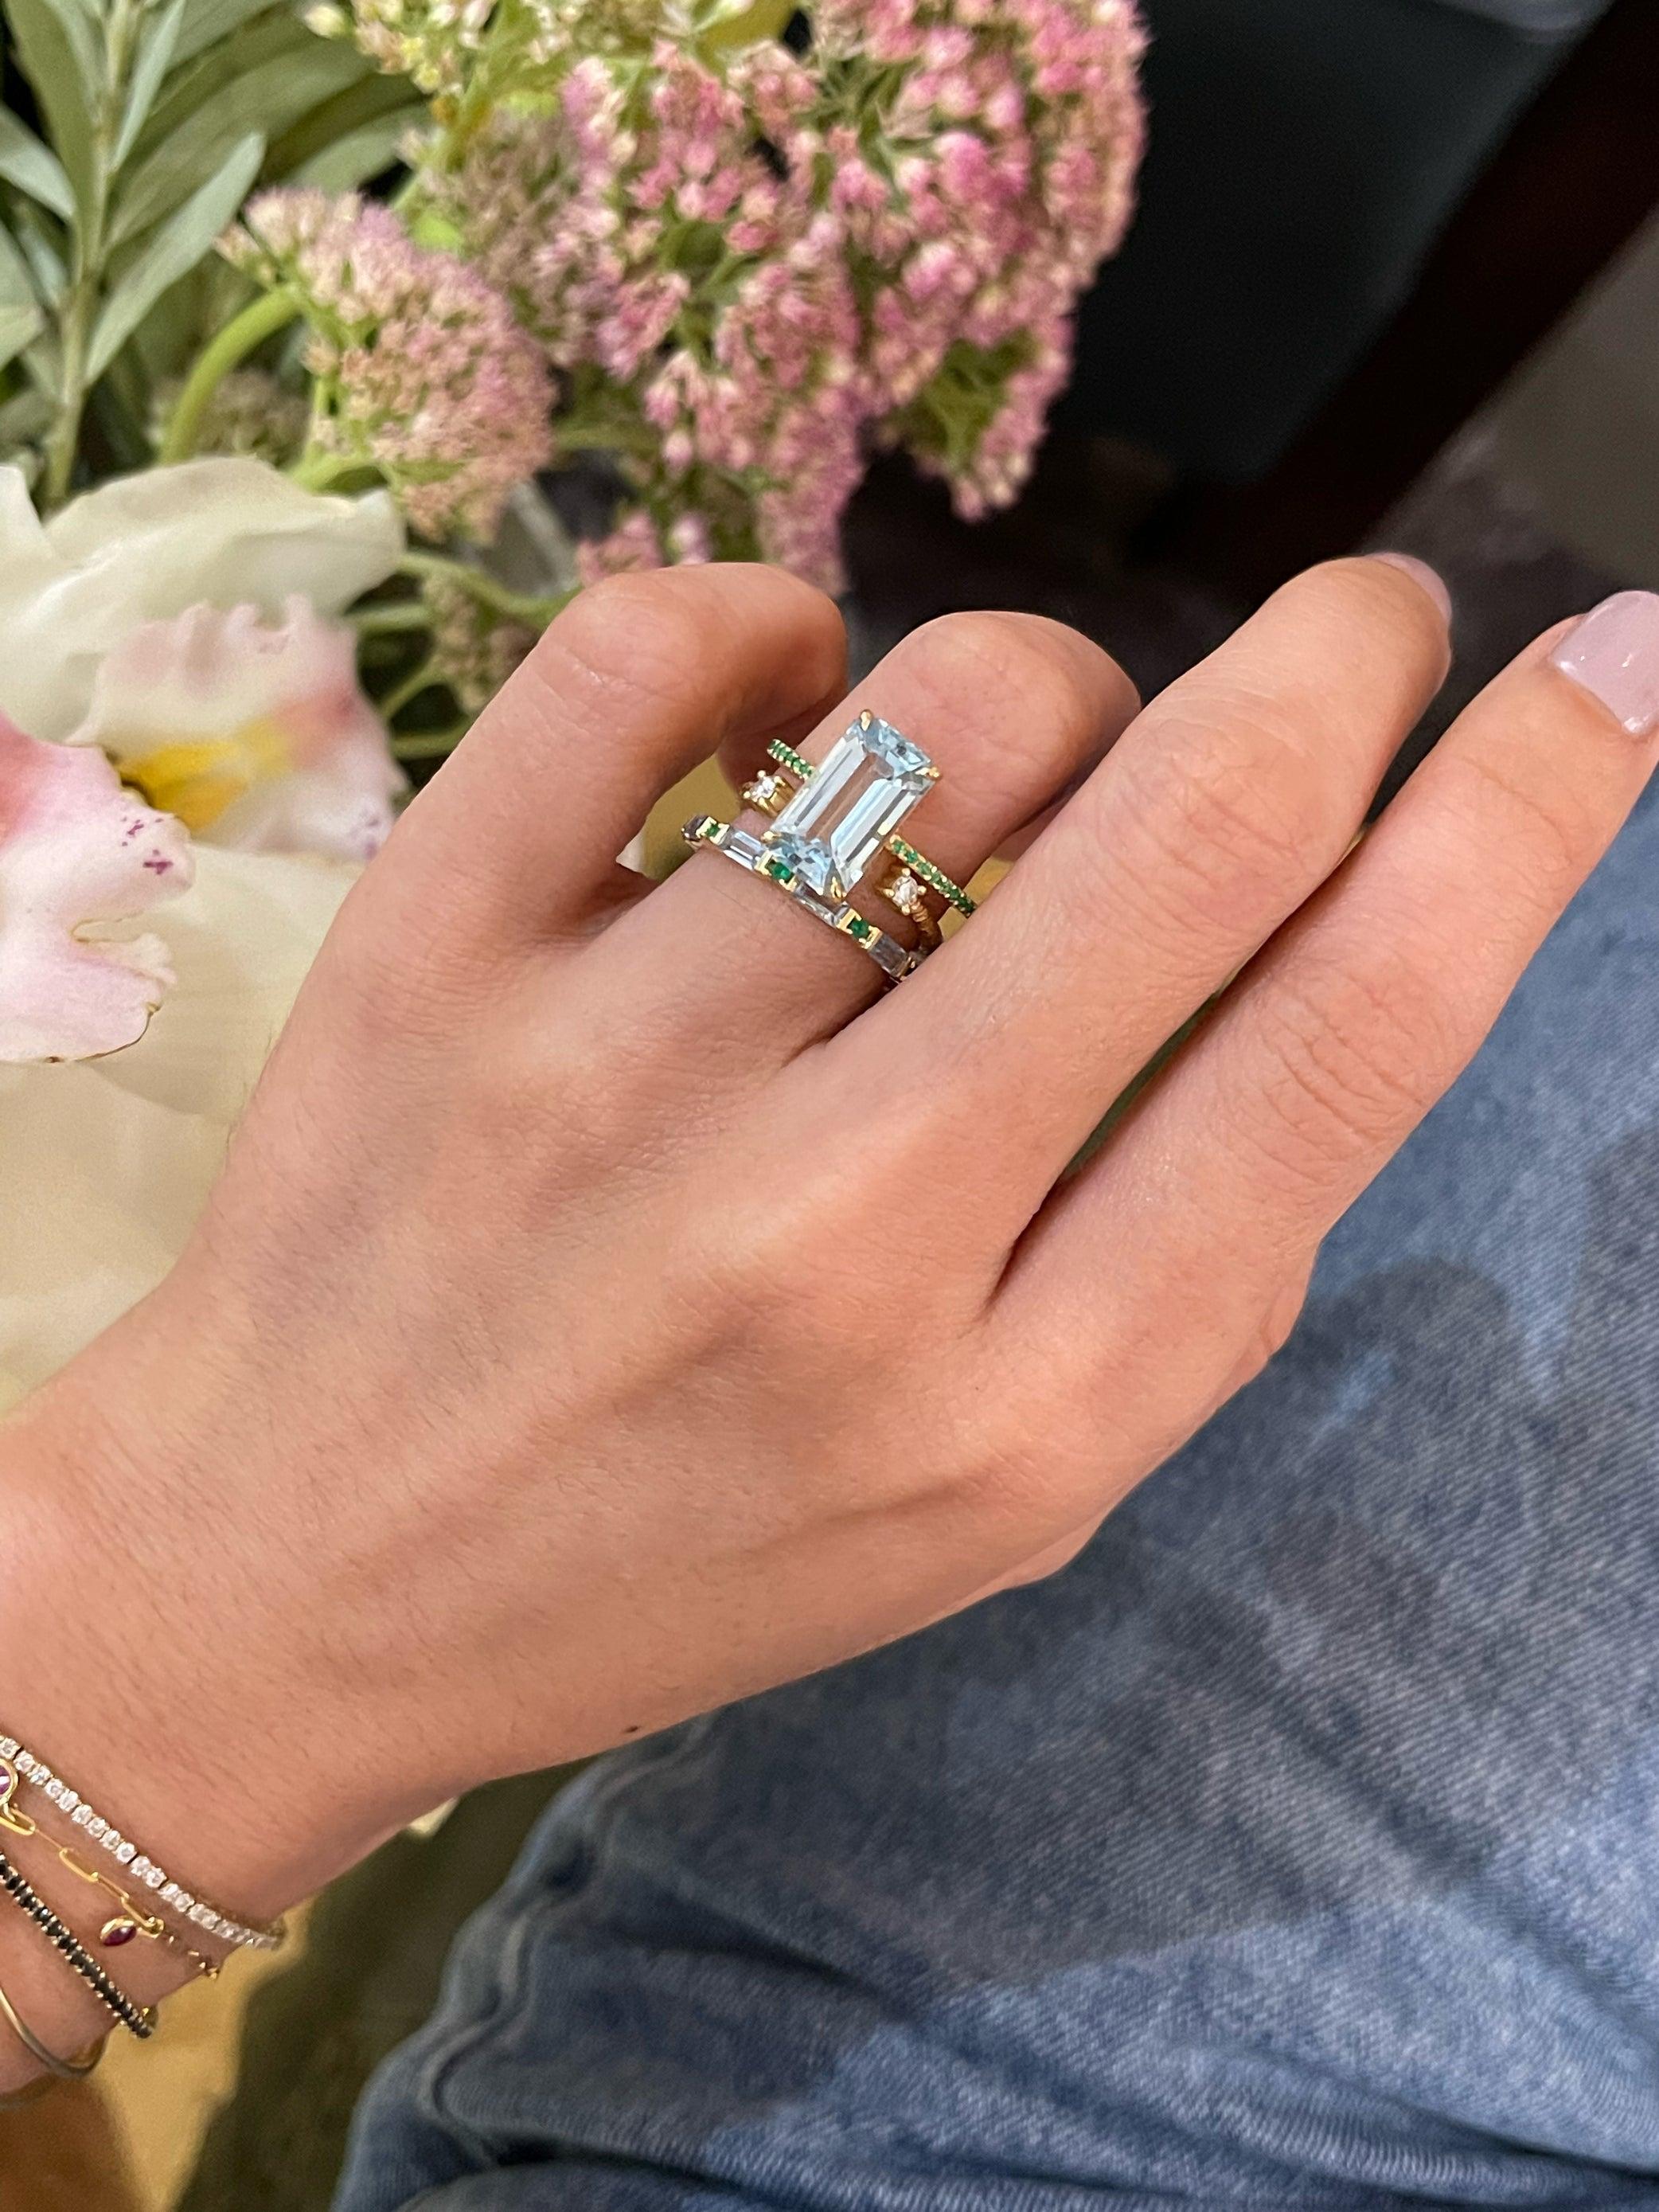 The spirit of growth and abundance embodied. This effortlessly chic ring combines two of our favorite gemstones into one masterpiece. Emeralds symbolize a successful & abundant love while aquamarines symbolize everlasting love & hope. This modern